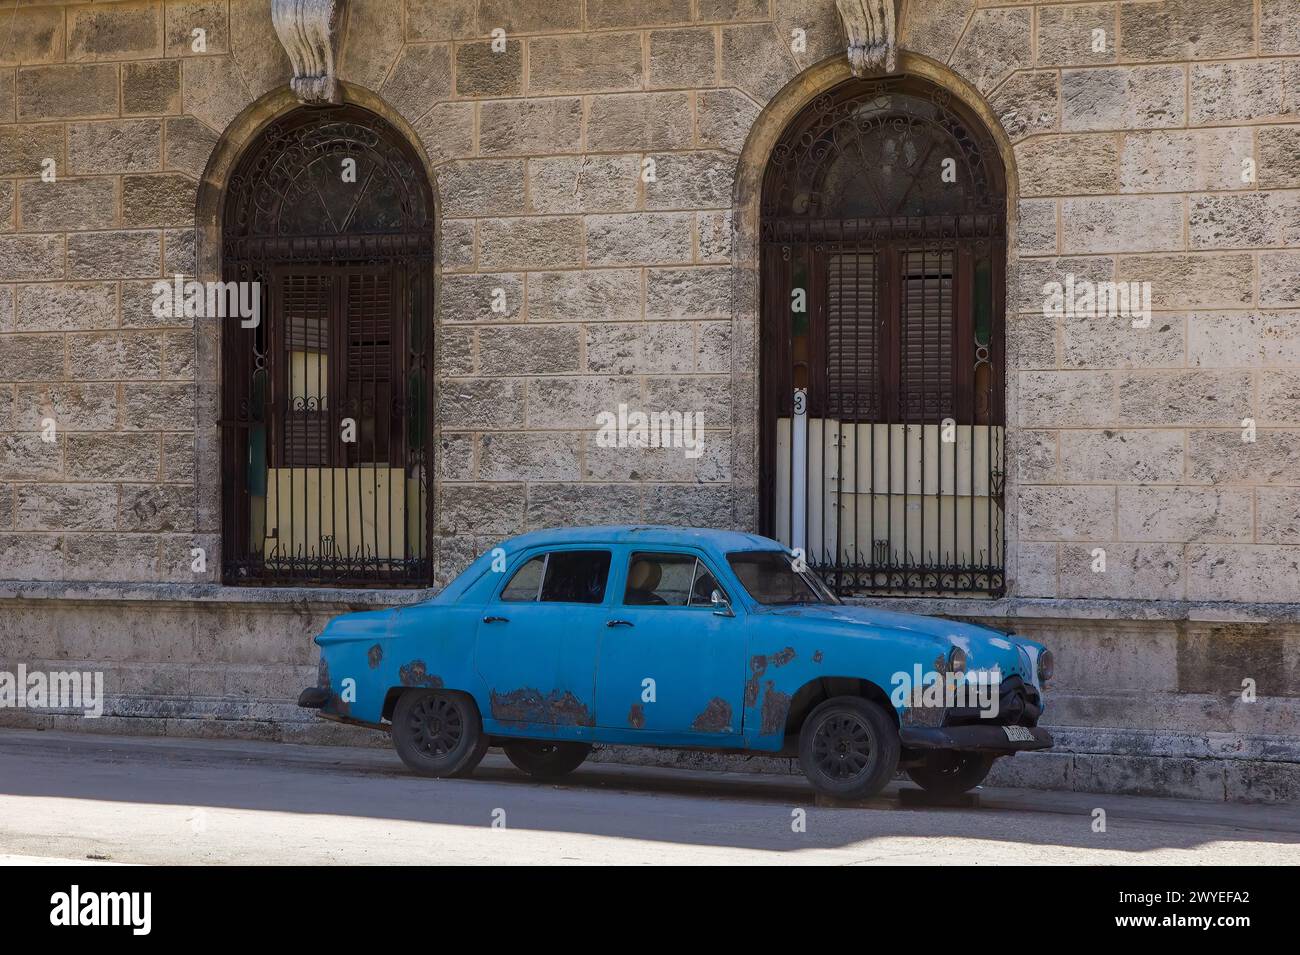 Shabby old car parked by a stone wall in Havana, Cuba Stock Photo